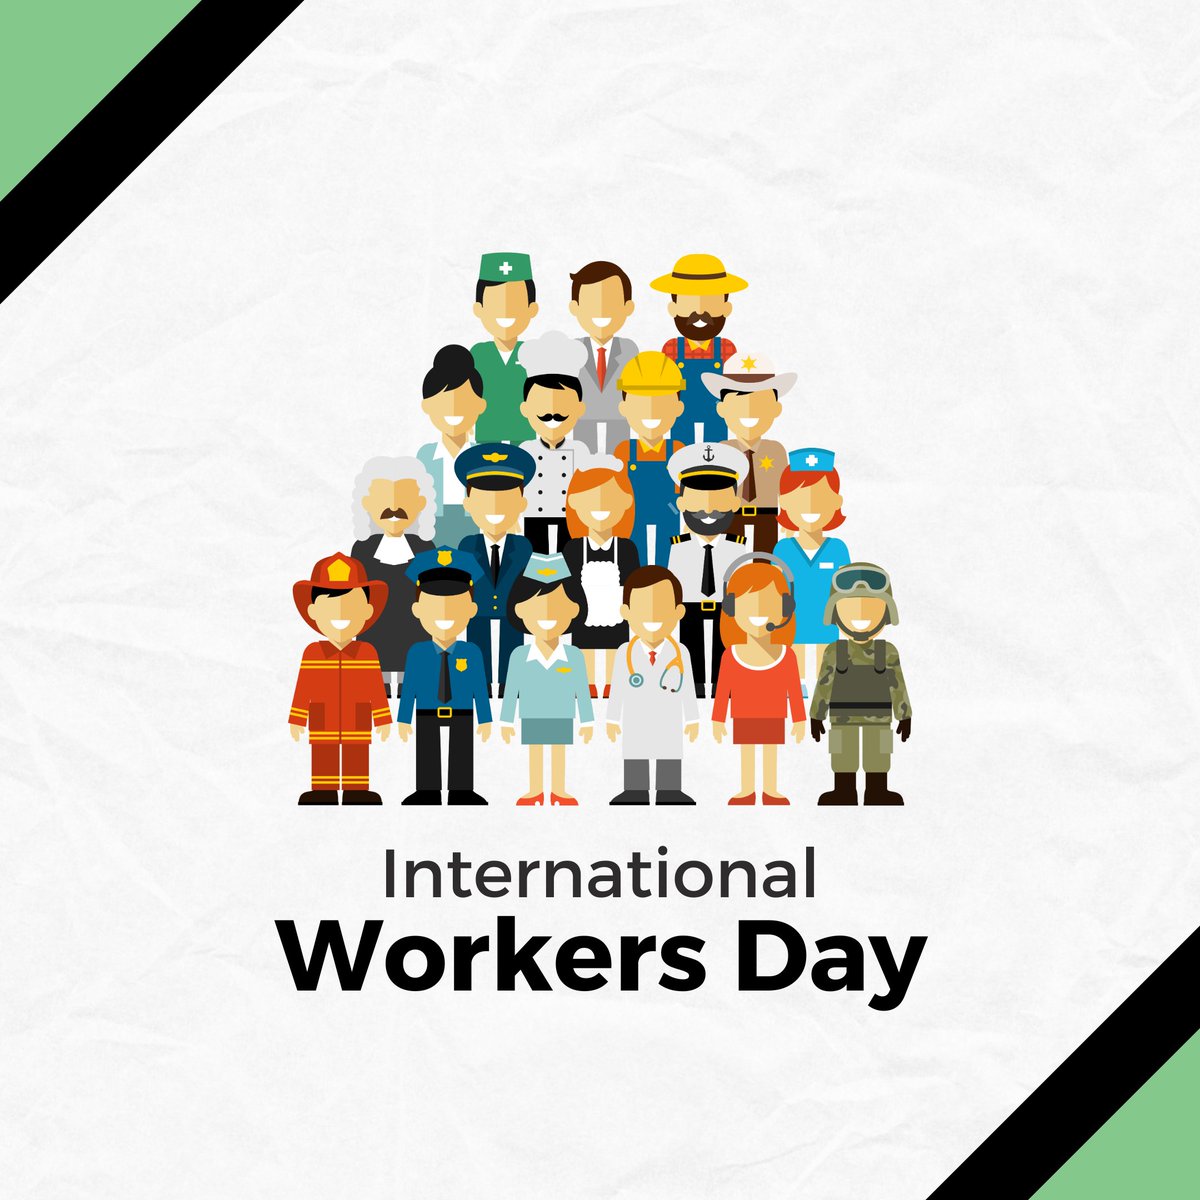 🌟 Happy International Workers Day! Today we celebrate the hard work and dedication of workers around the world. Let's take this opportunity to honor their contributions to fair wages, safe working conditions, and respect for all workers. 

#InternationalWorkers #Fairwage #DC